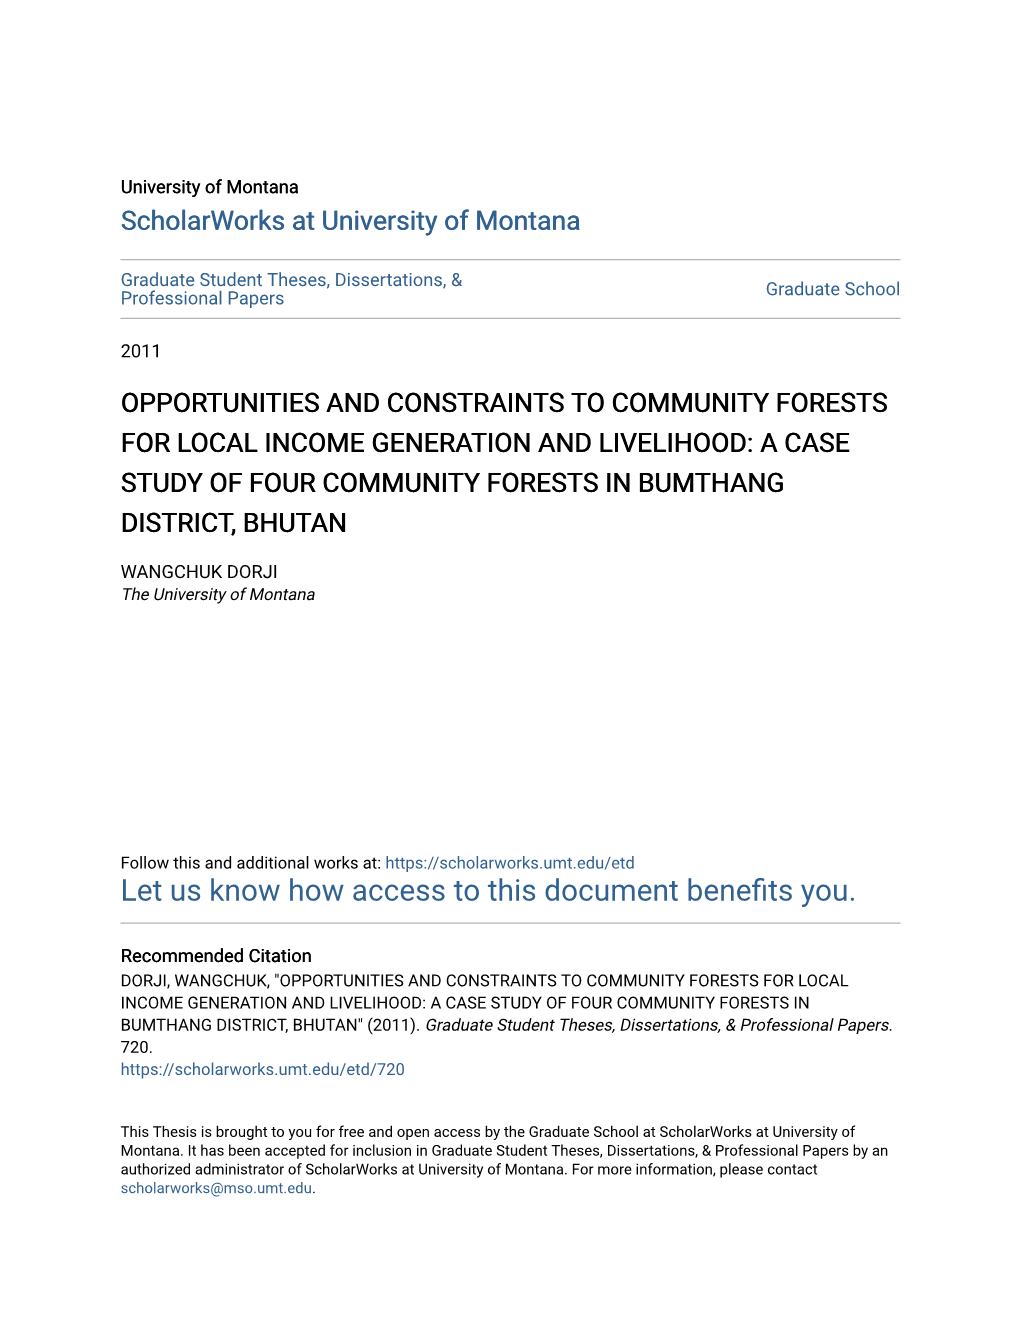 Opportunities and Constraints to Community Forests for Local Income Generation and Livelihood: a Case Study of Four Community Forests in Bumthang District, Bhutan